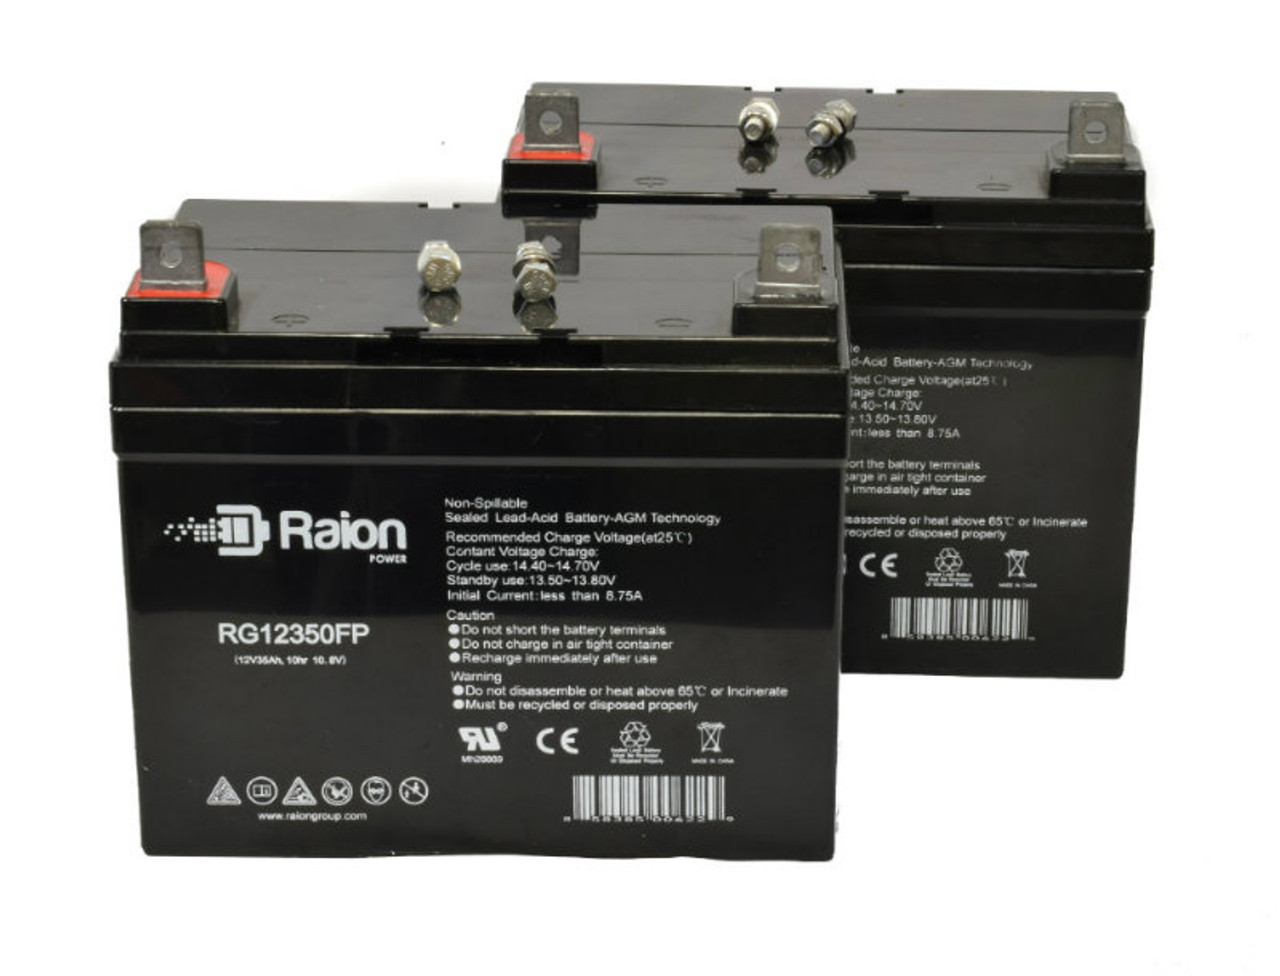 Raion Power Replacement 12V 35Ah Lawn Mower Battery for Root MFG Co. 830-E - 2 Pack